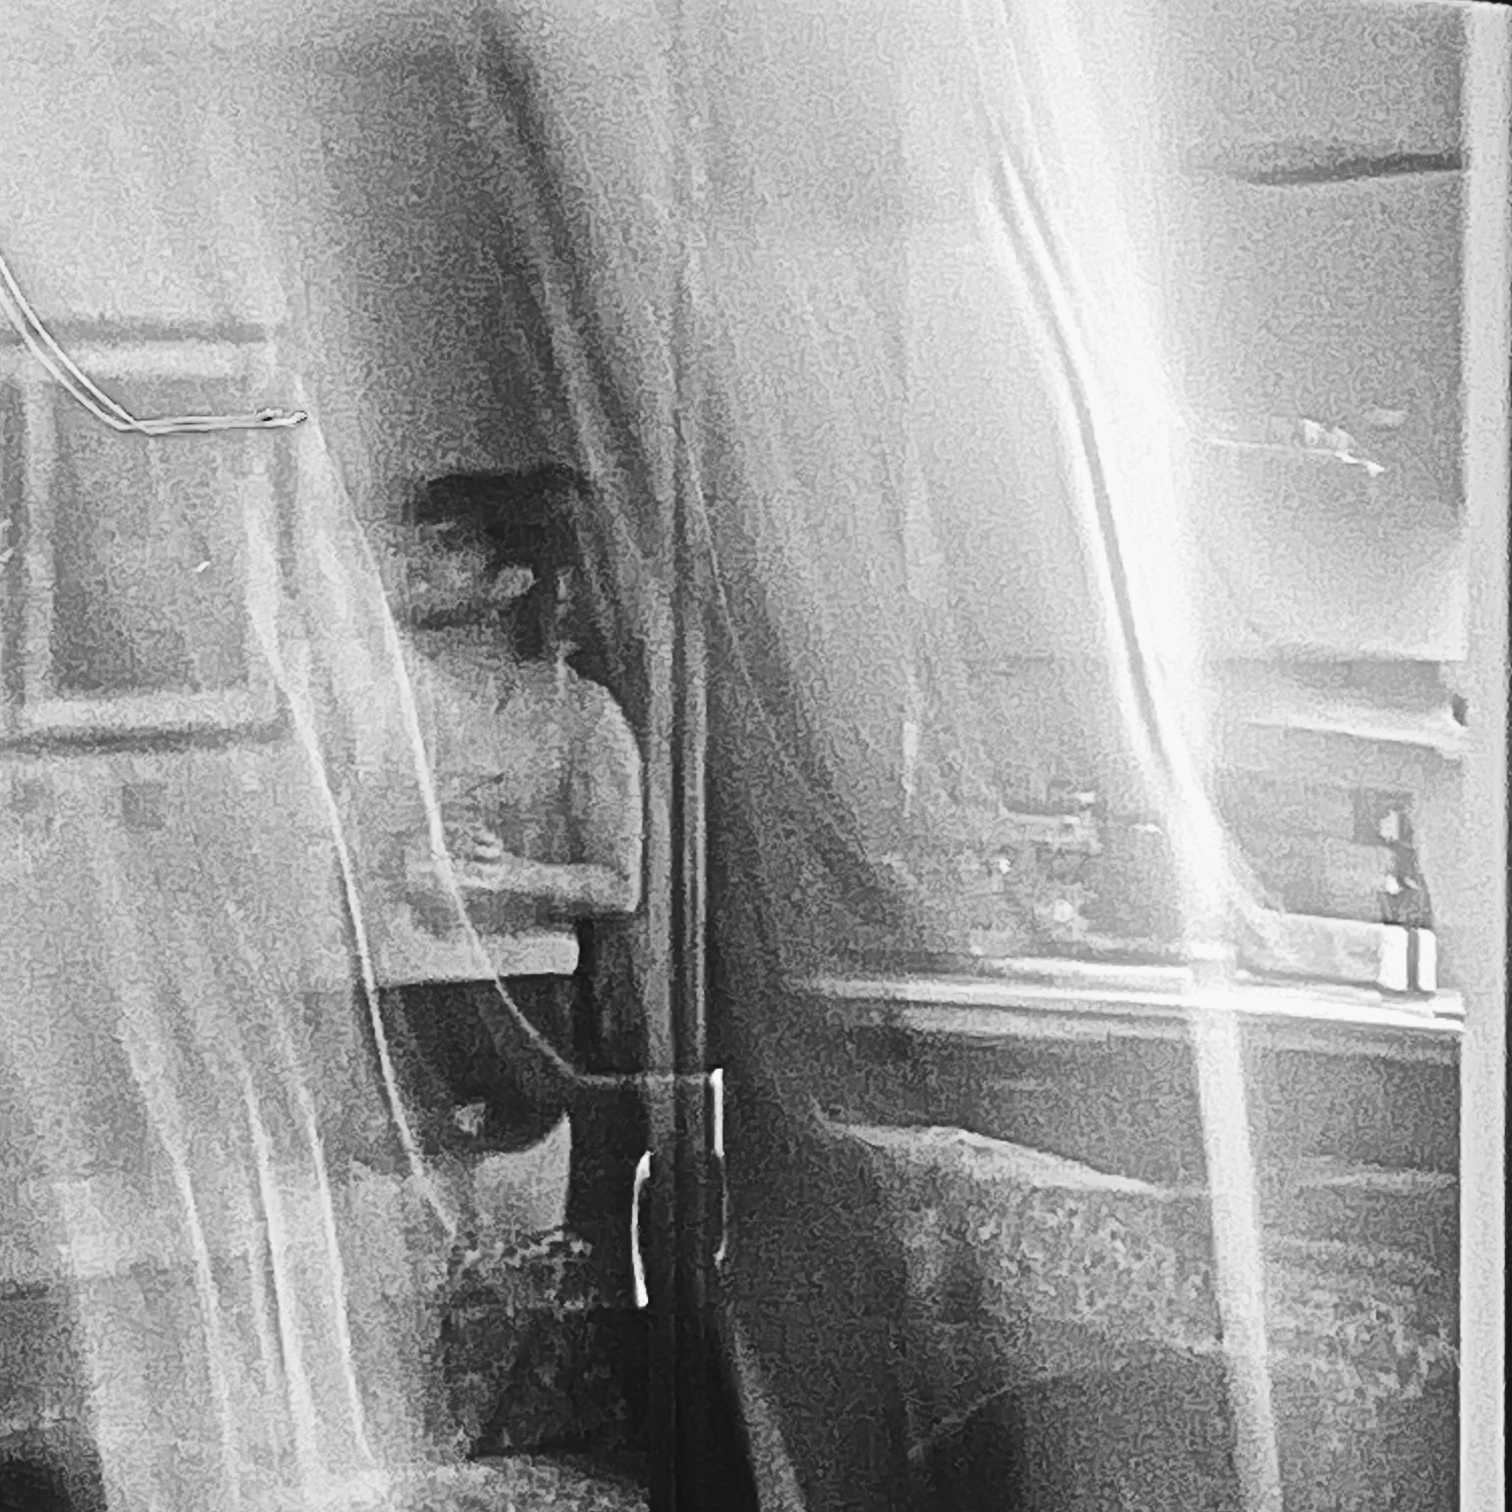 A photograph of a man in an apartment; a curtain covers the scene.